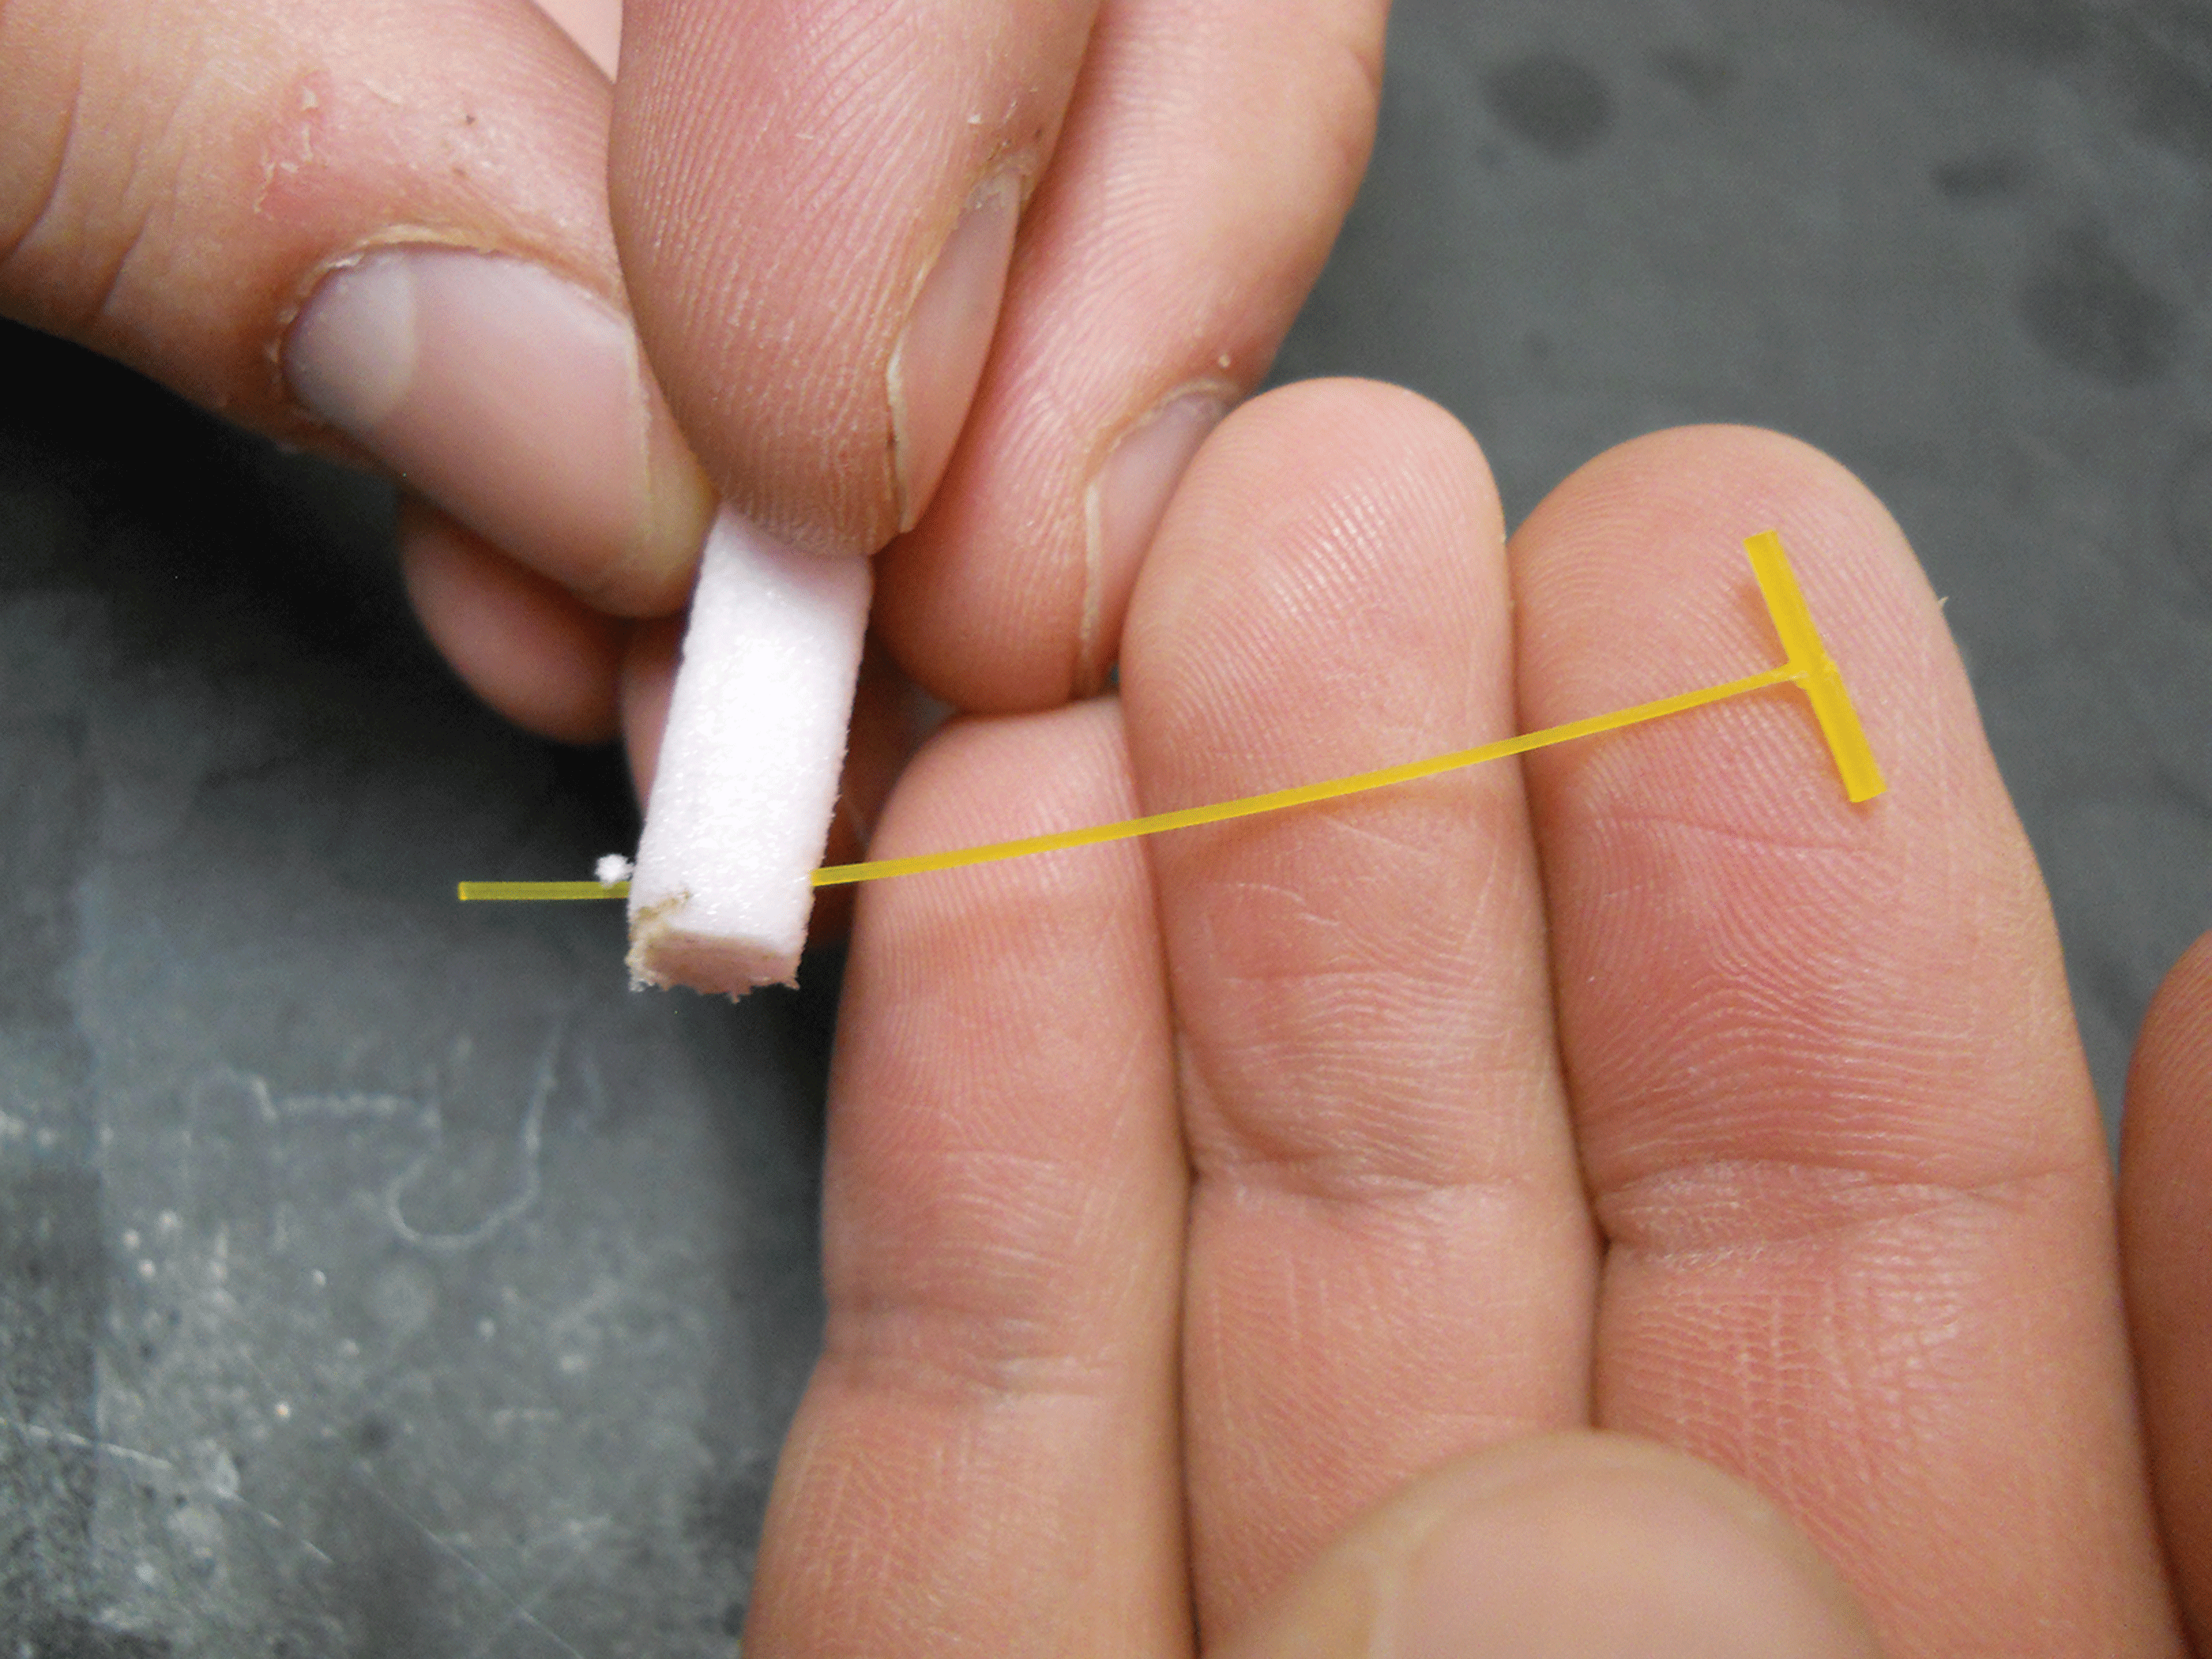 Photograph showing a T-bar tag being inserted perpendicular through the end of pink
                        foam.